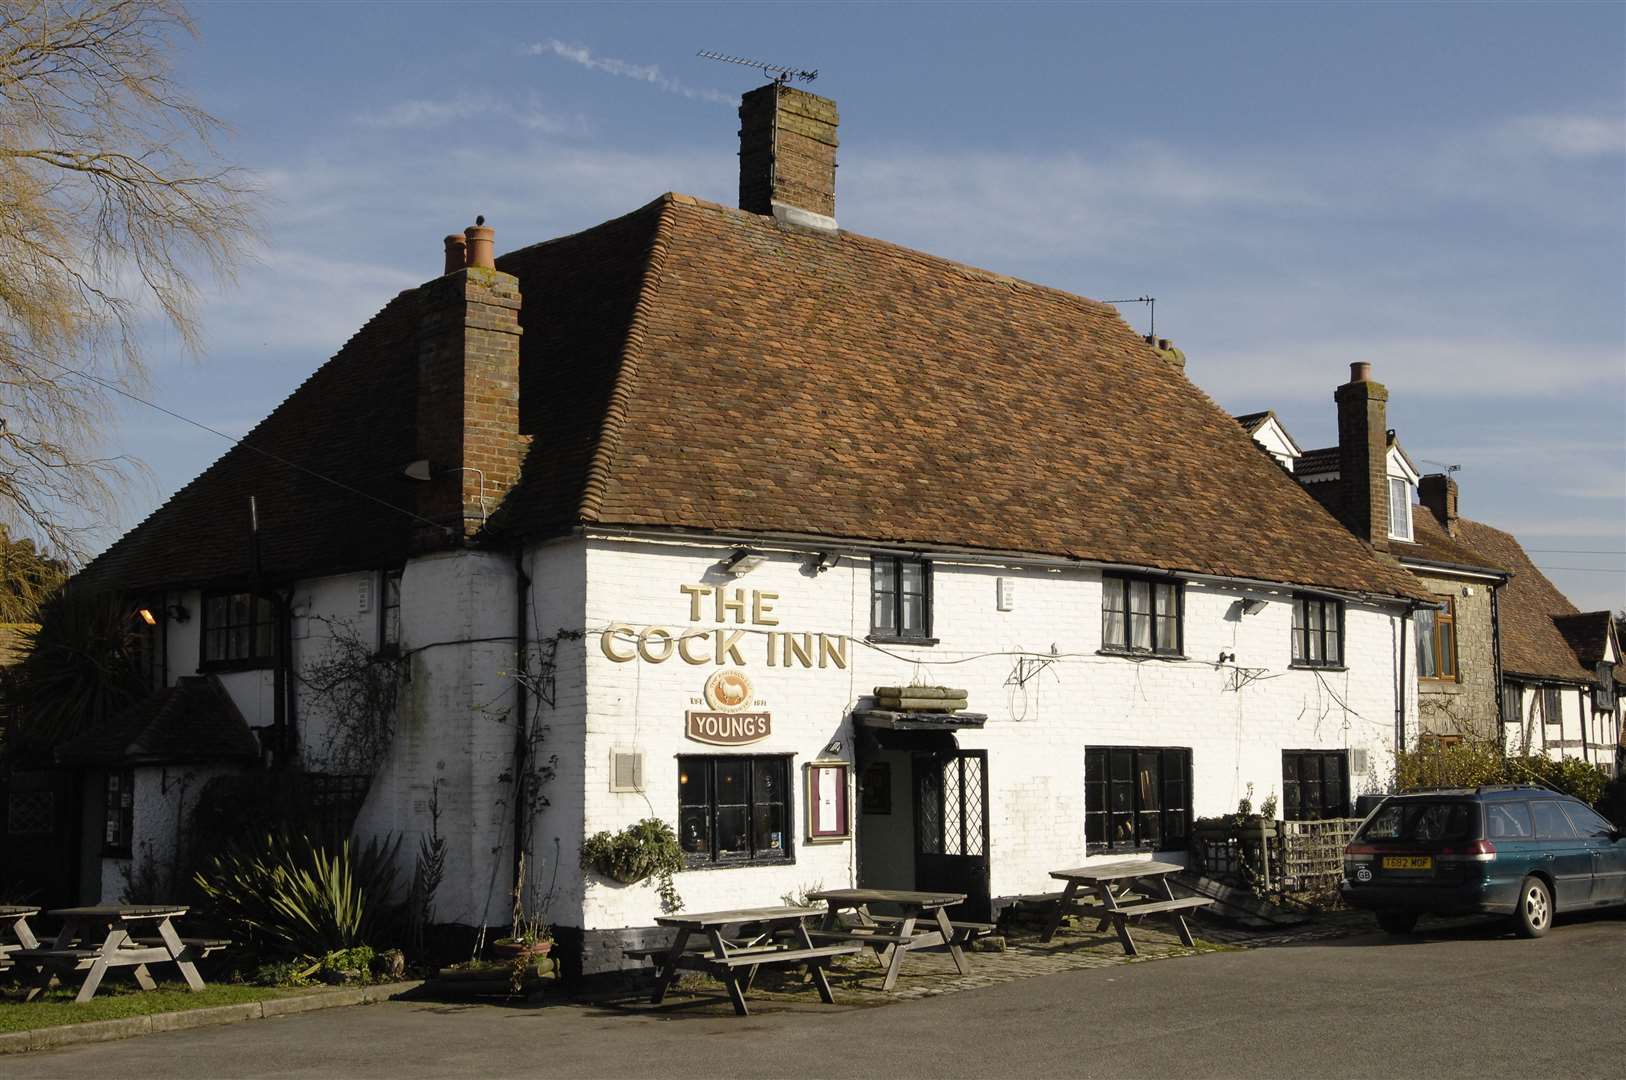 One daughter became the landlady of The Cock Inn in Heath Road, Boughton Monchelsea